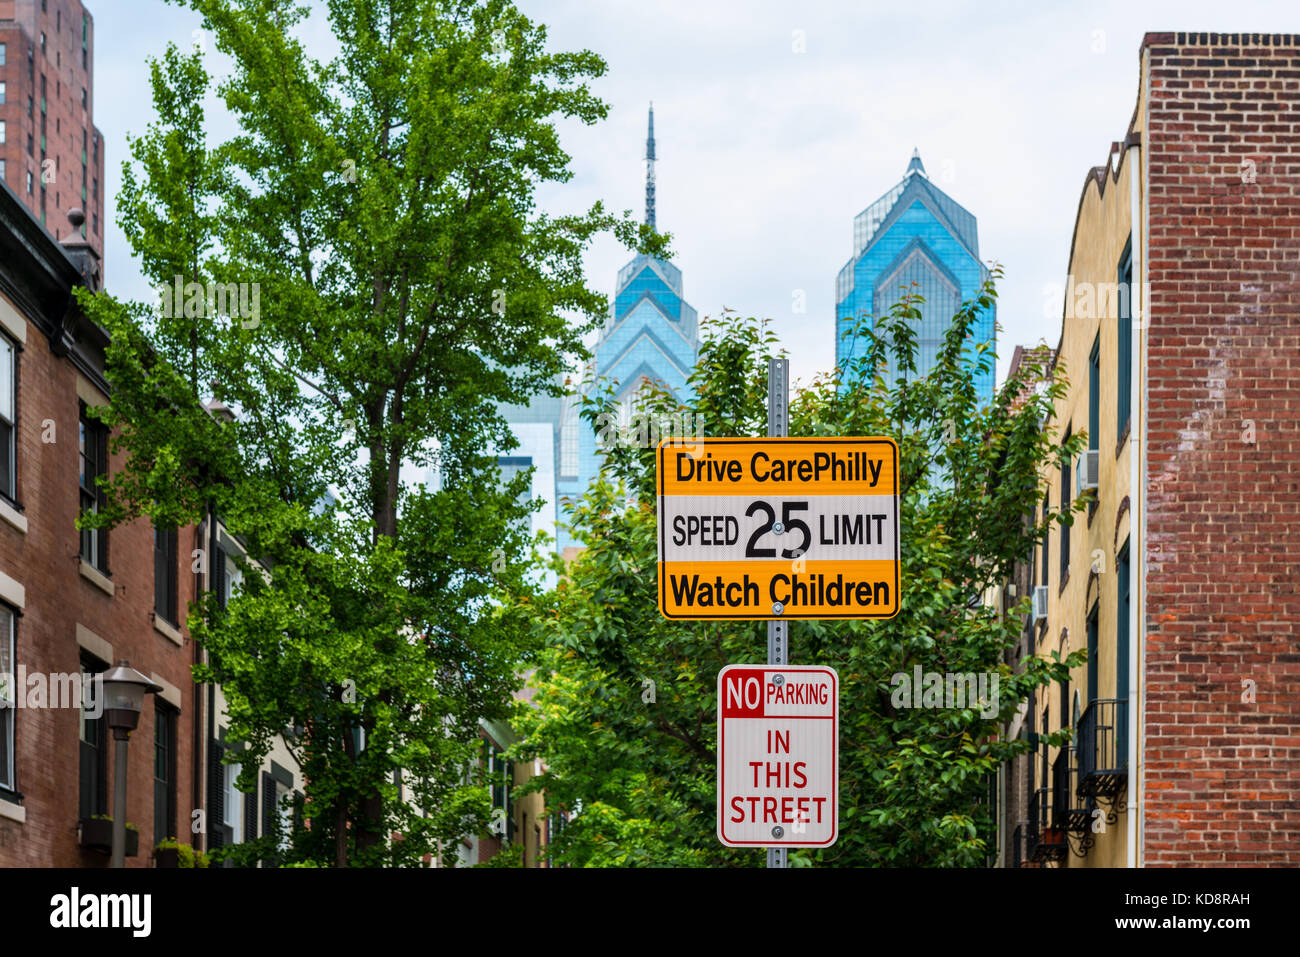 Drive CarePhilly Warning Sign in Street of Downtown District in Philadelphia, Pennsylvania, USA Stock Photo